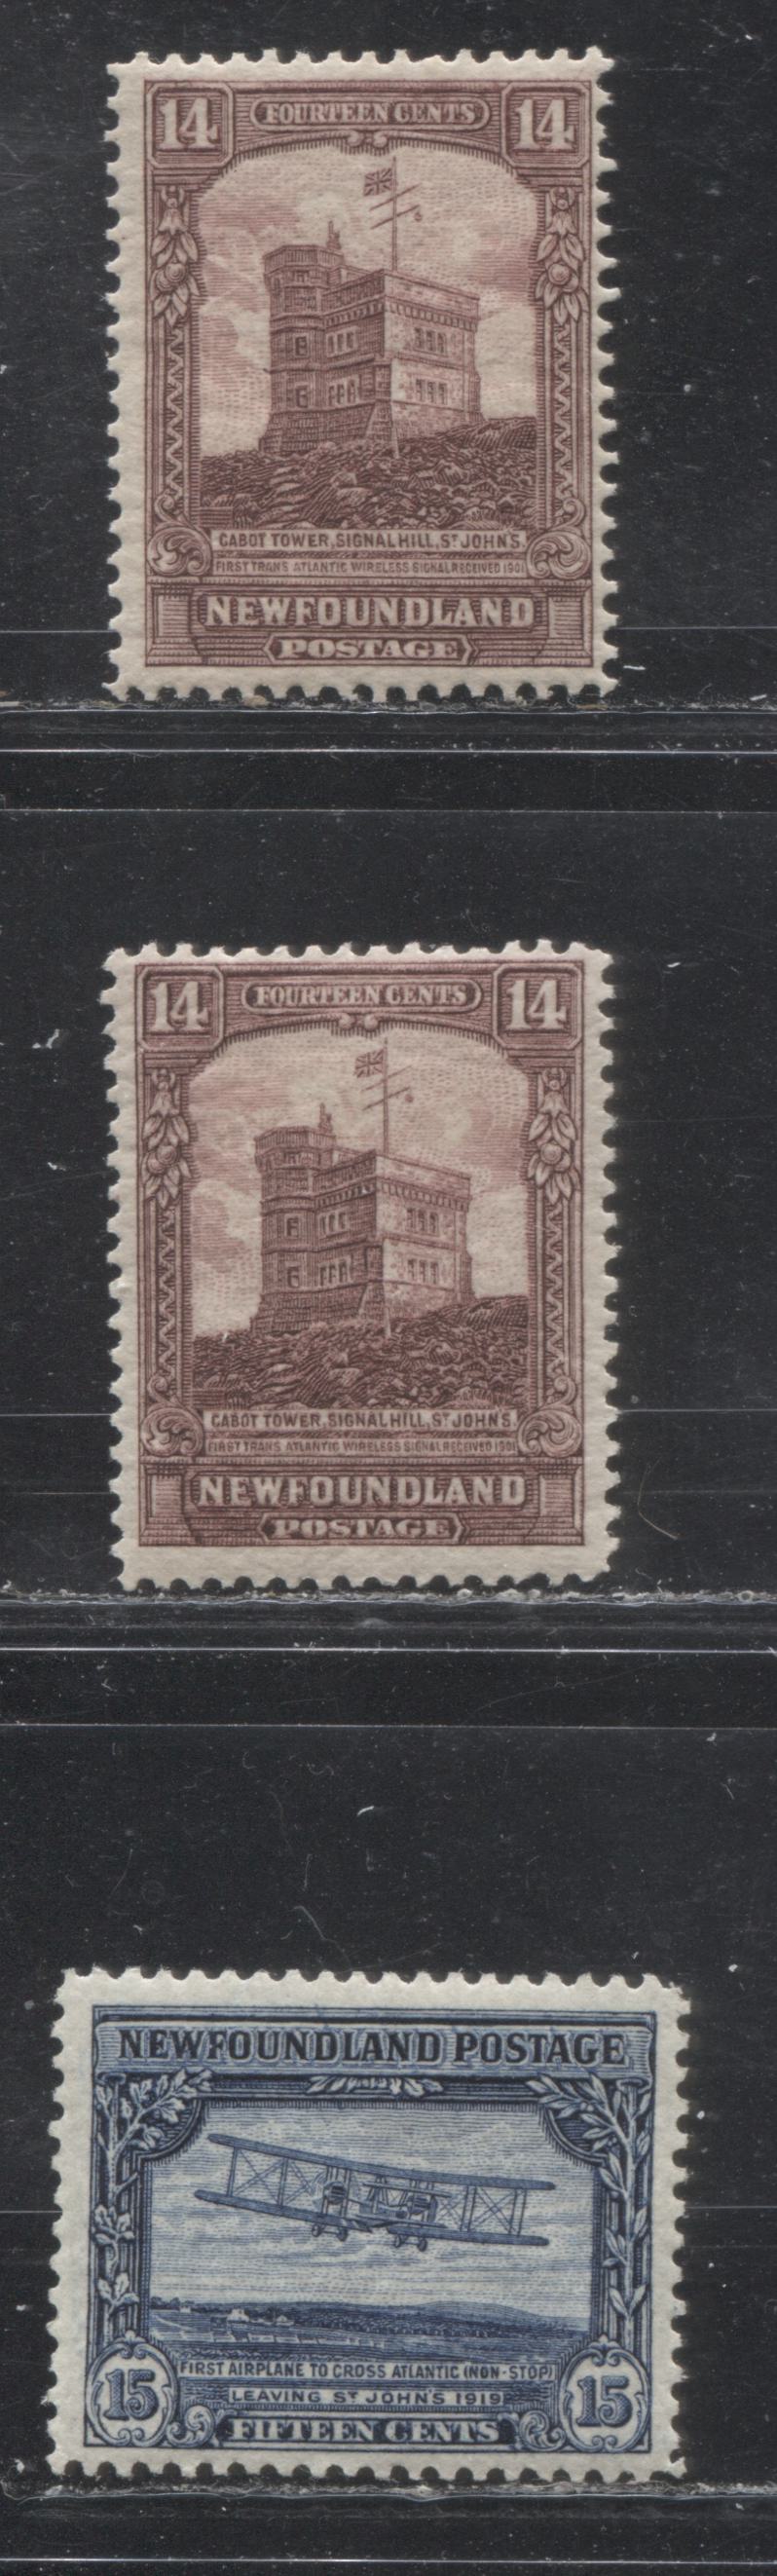 Lot 74 Newfoundland # 155-156 14c & 15c Maroon & Dark Blue Cabot Tower& Airplane Crossing Atlantic, 1928-1929 Publicity Issue, Three Fine OG Examples, Various Line Perfs